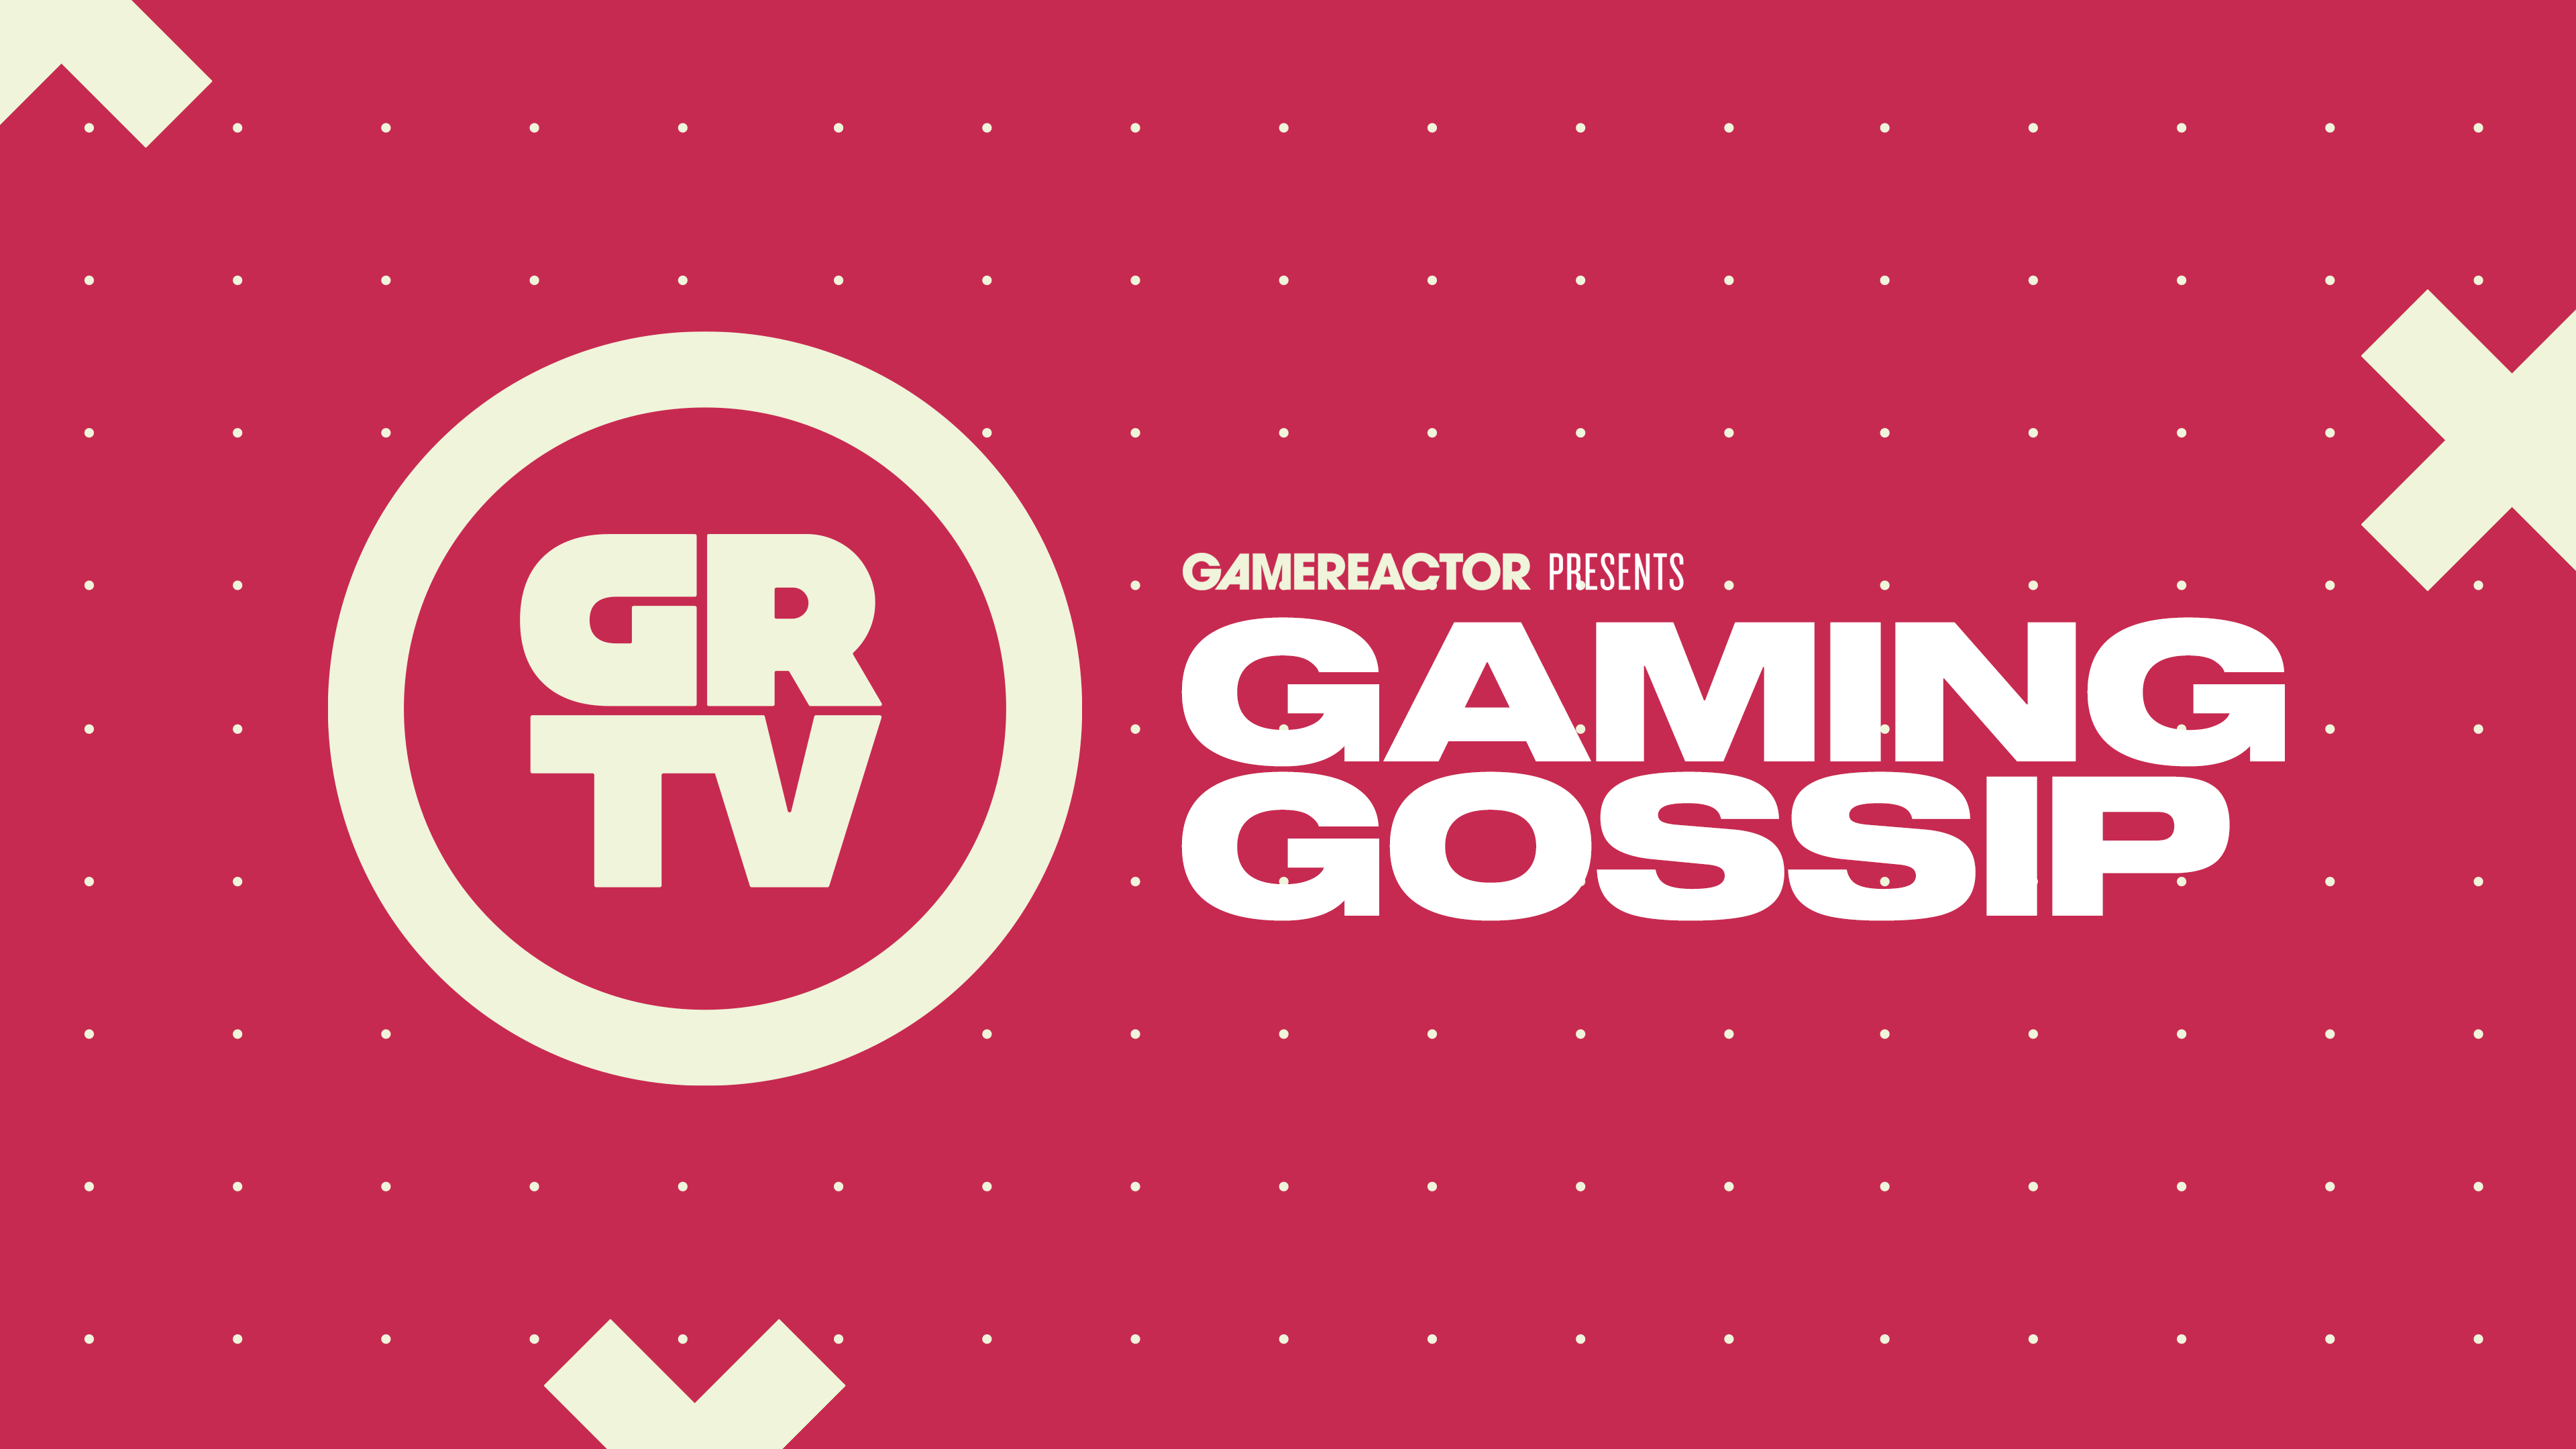 Are we in a golden age of game adaptations? We ponder the latest gaming gossip – Gamereactor